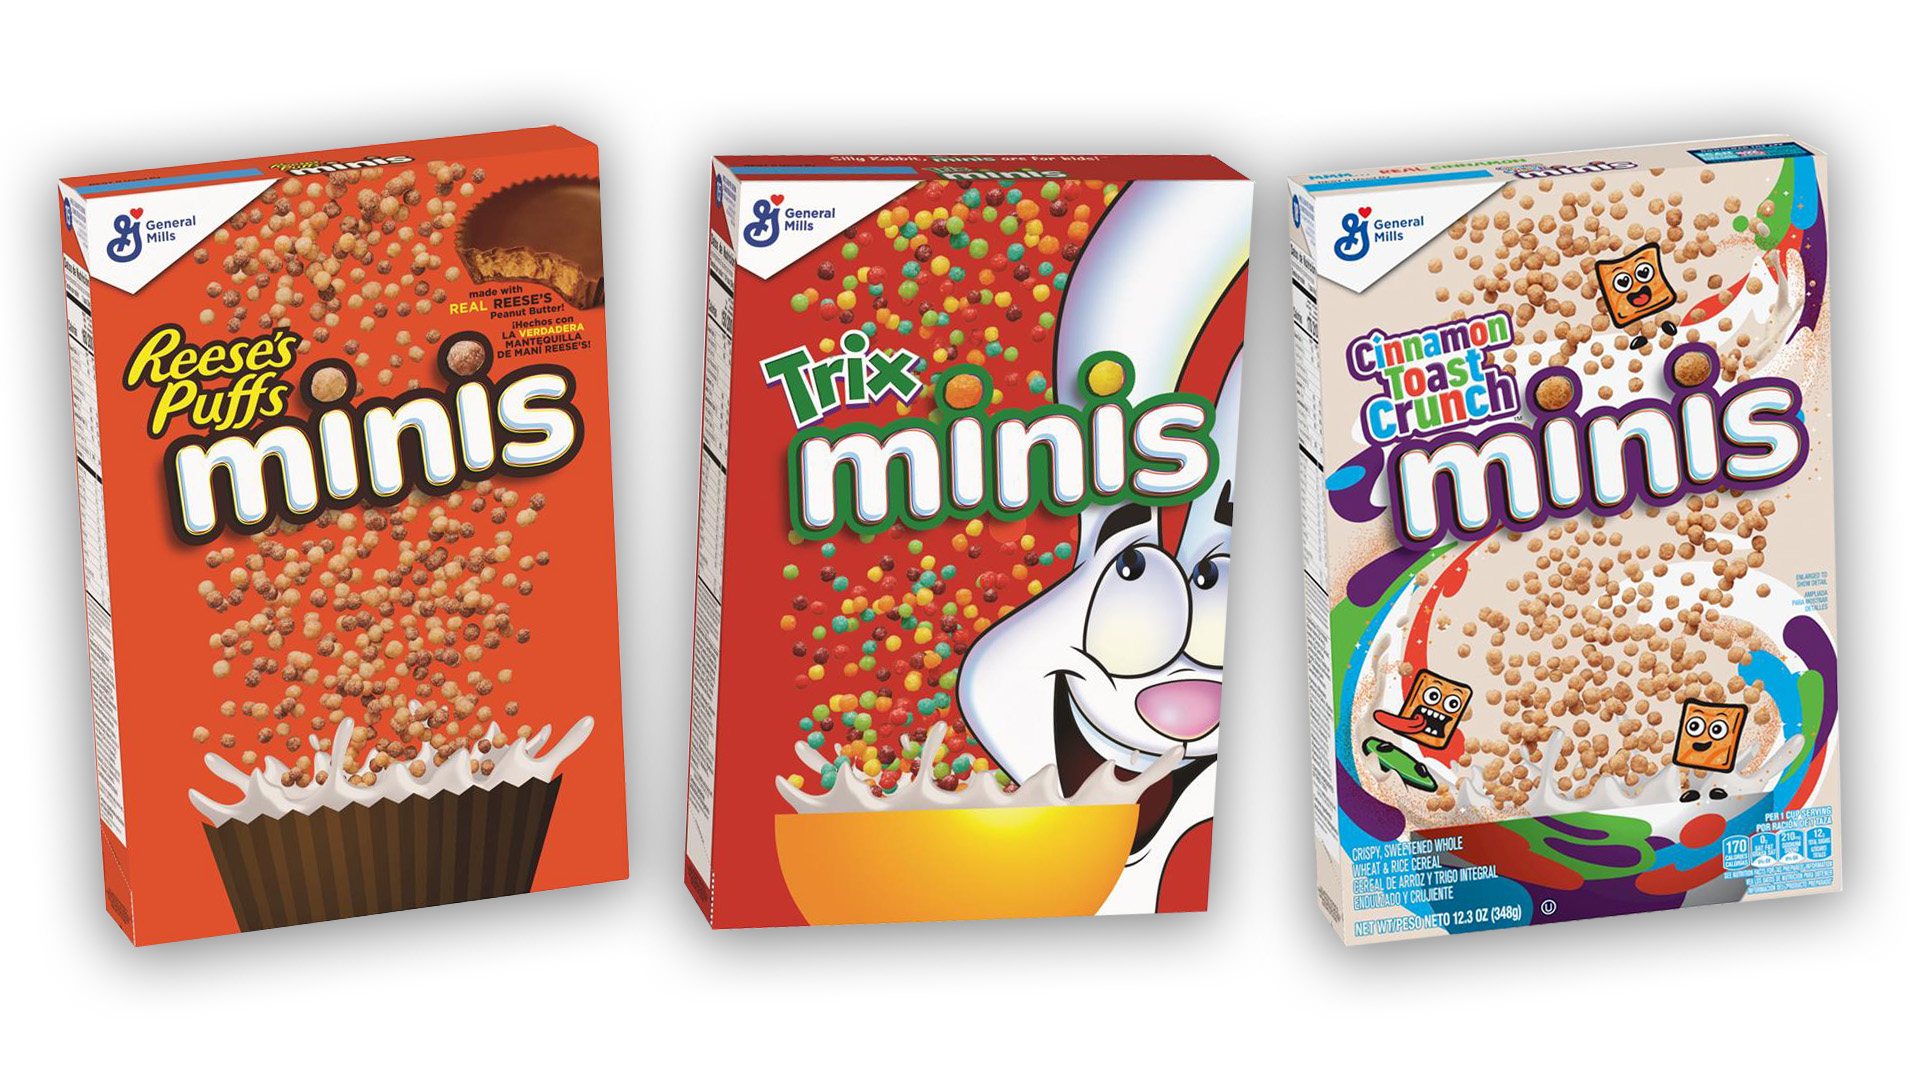 There boxes of new Minis cereal